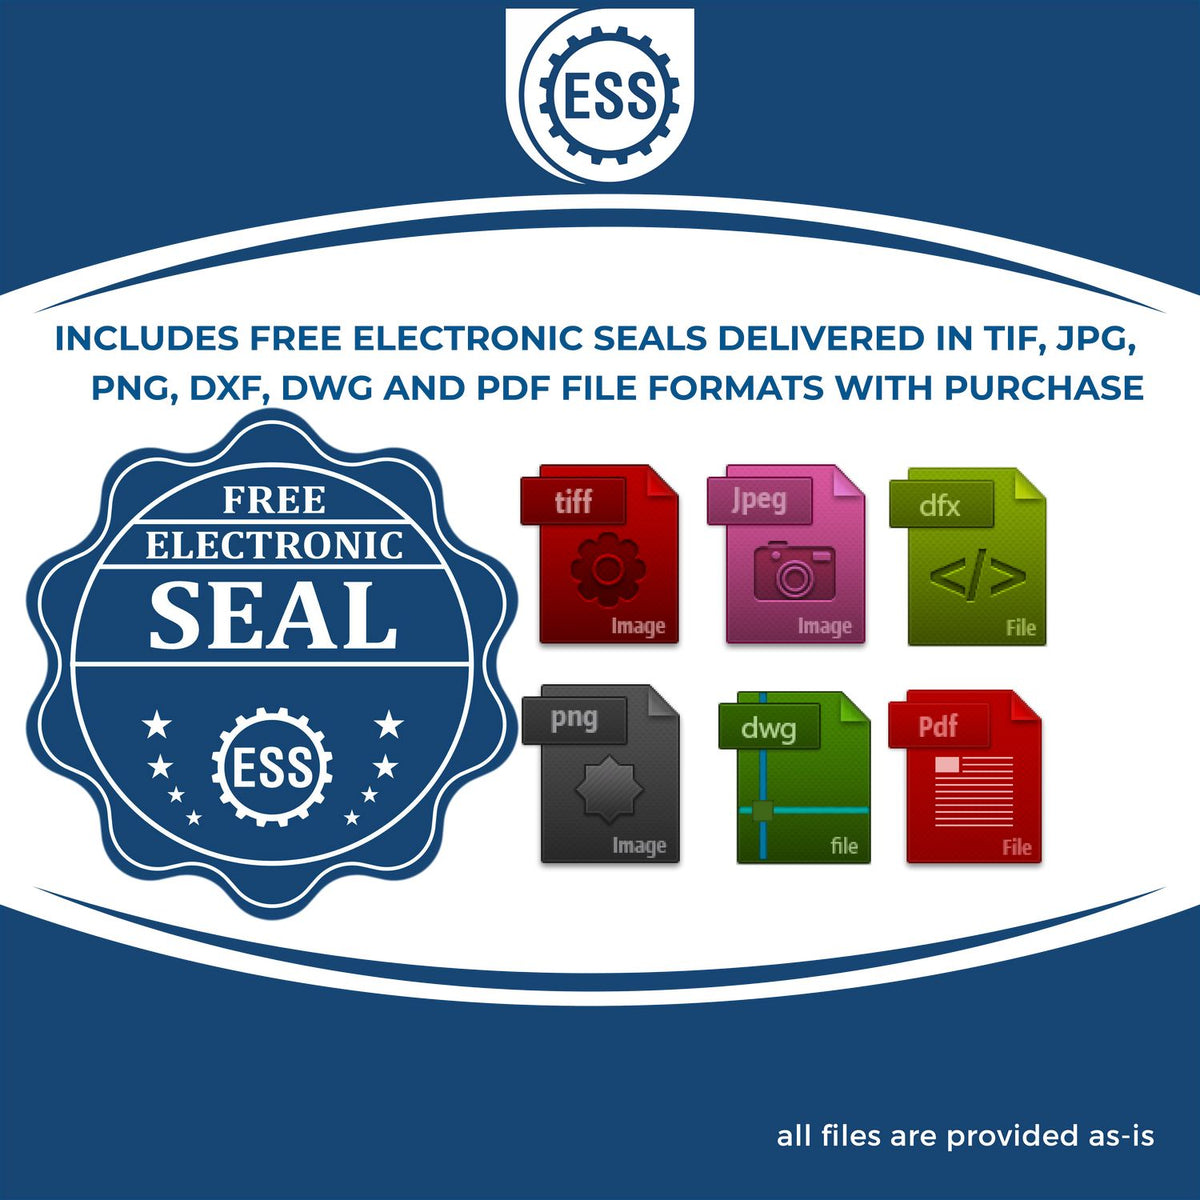 An infographic for the free electronic seal for the Premium MaxLight Pre-Inked Michigan Geology Stamp illustrating the different file type icons such as DXF, DWG, TIF, JPG and PNG.